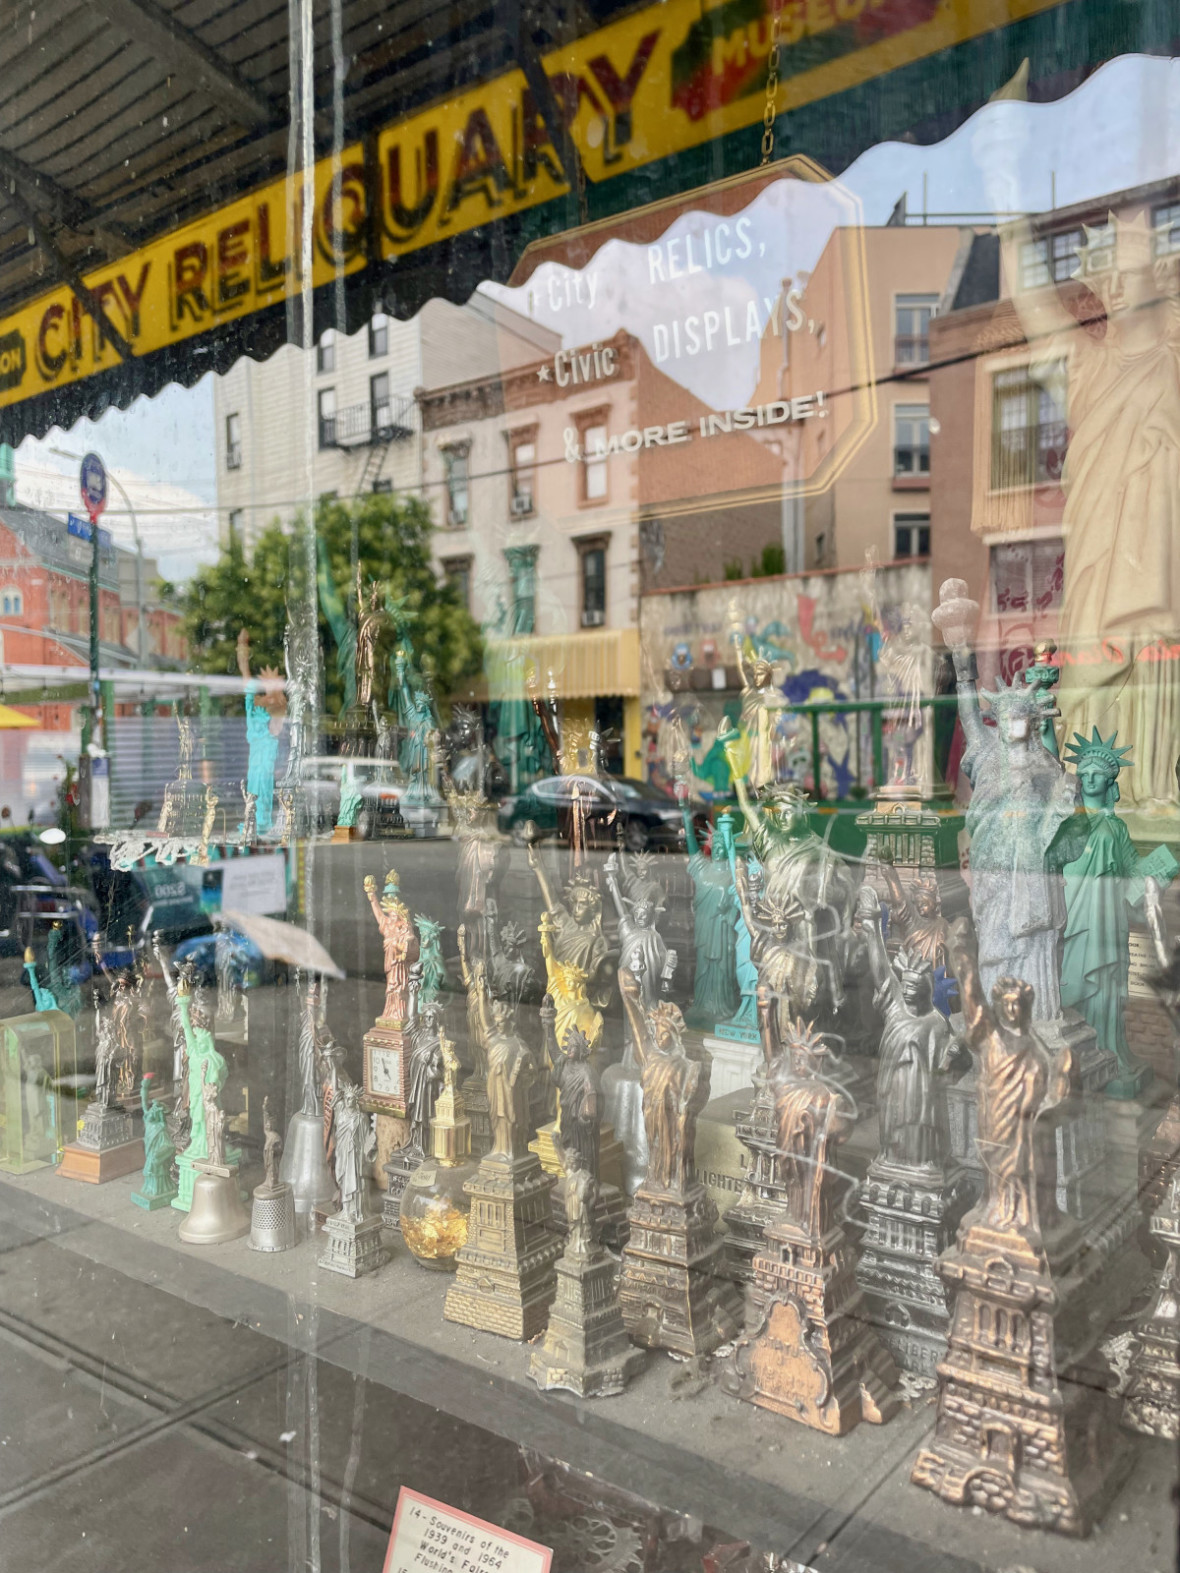 Window filled with Statue of Liberty figurines at City Reliquary